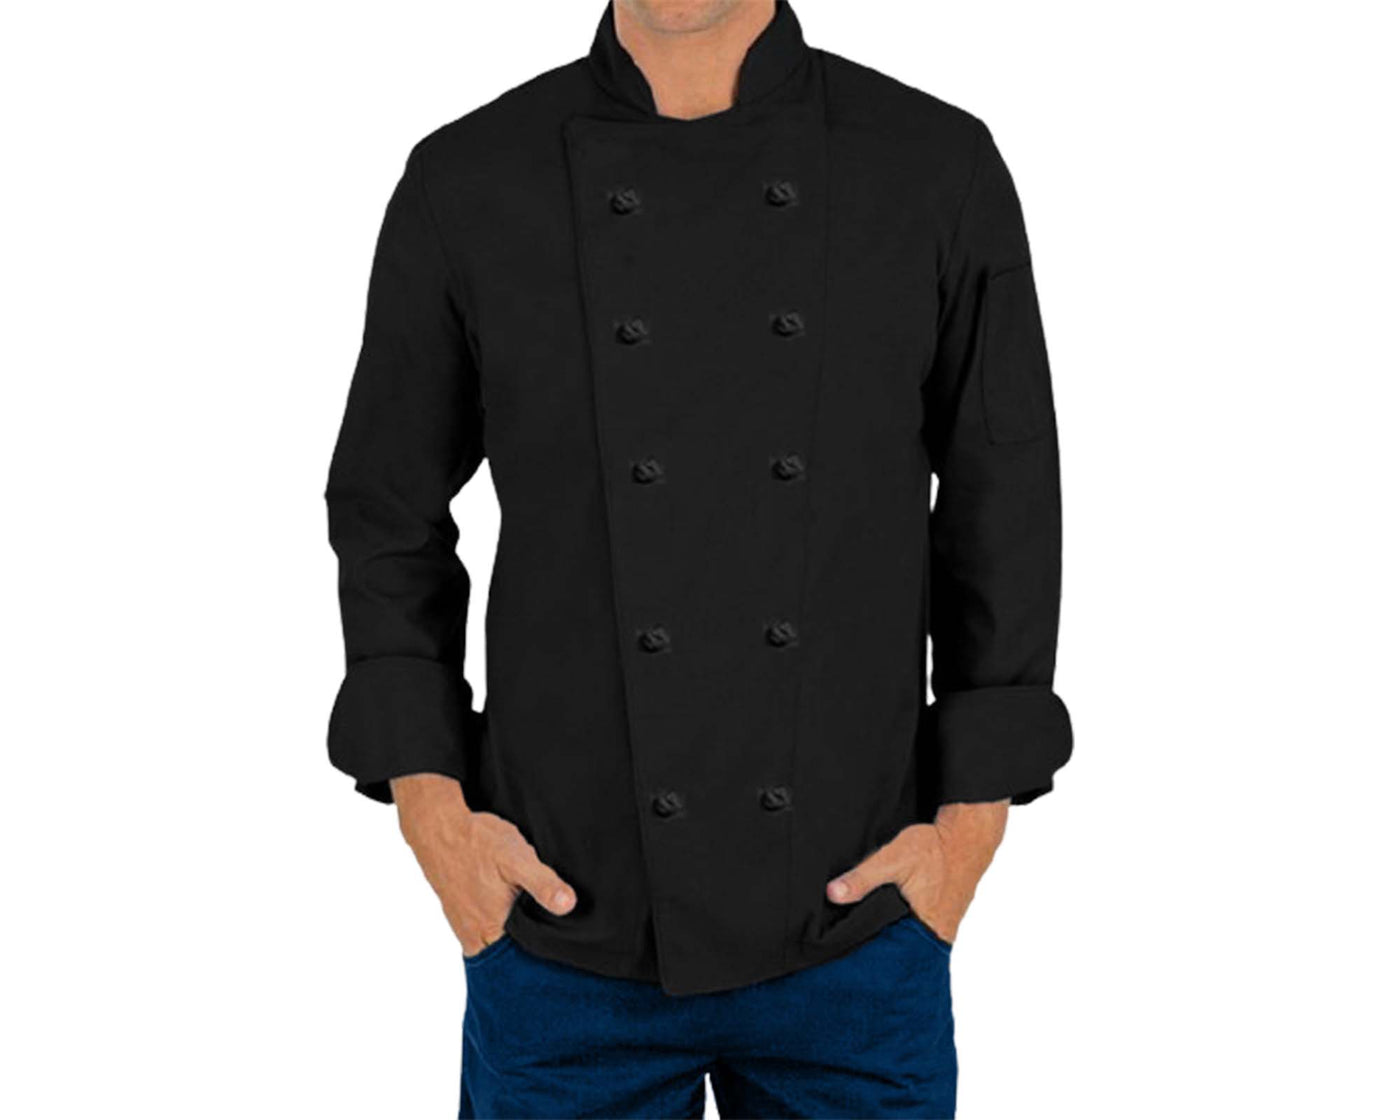 man wearing black chef coat with knot buttons